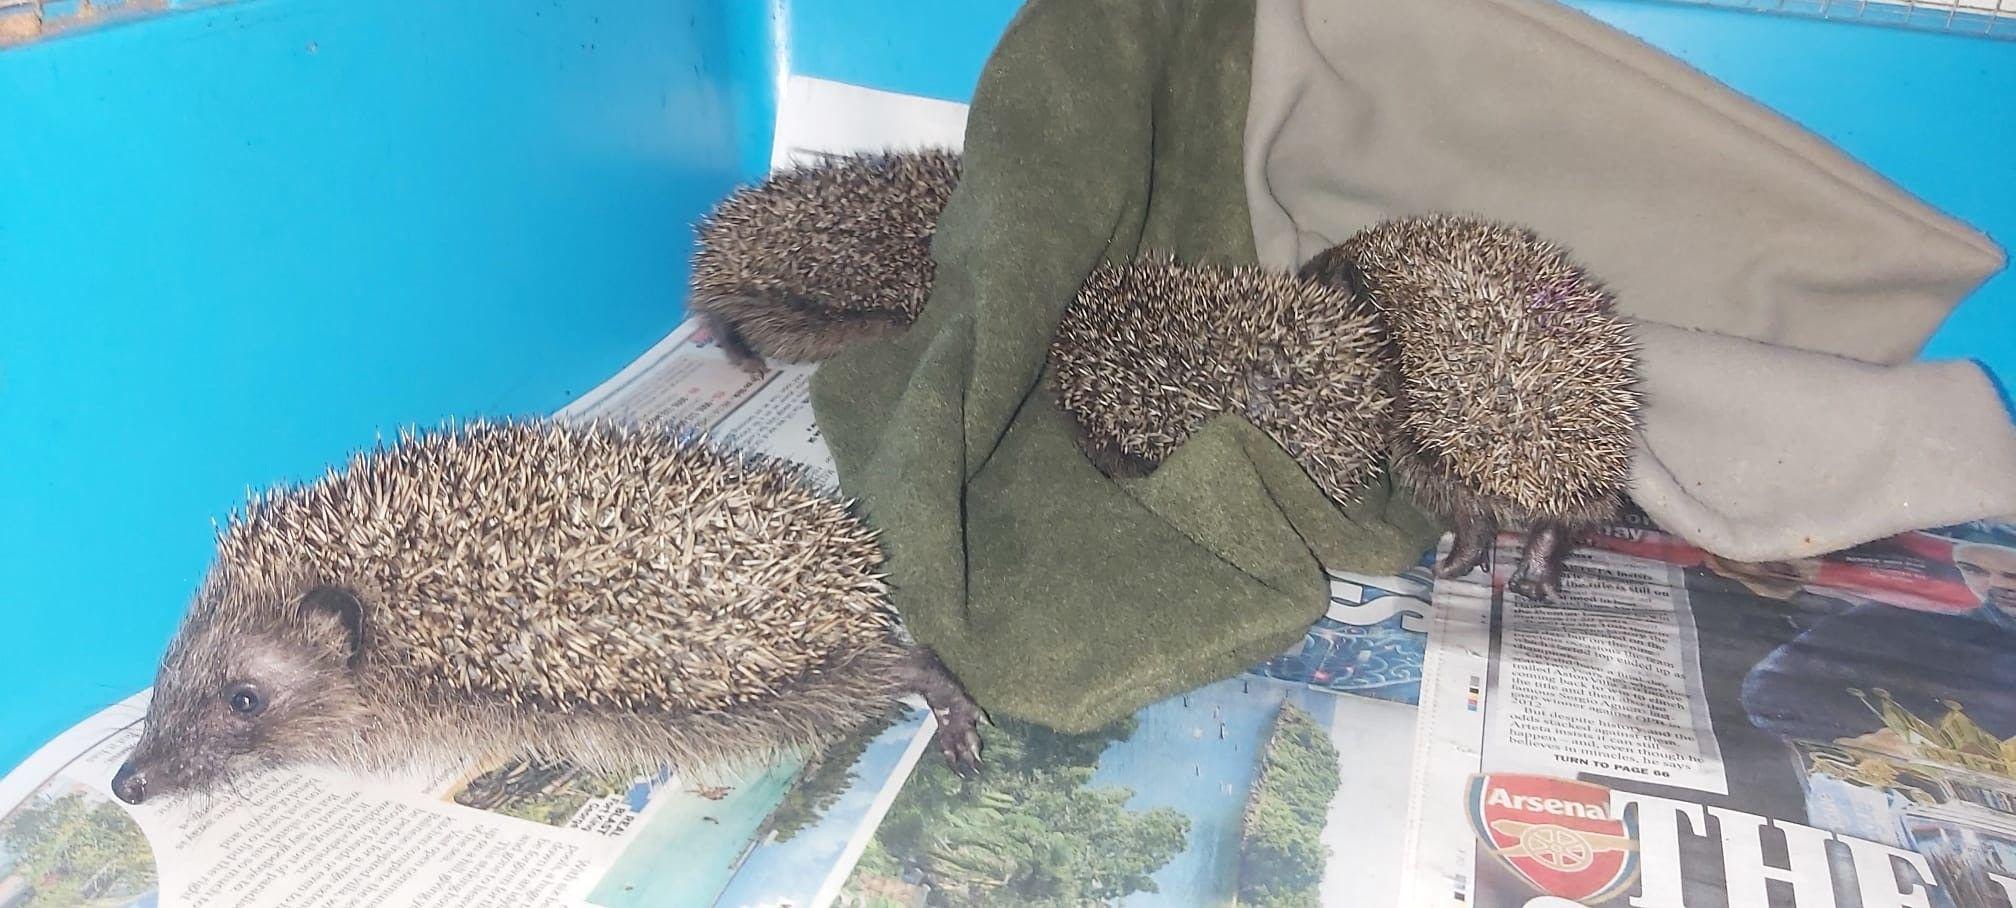 Community steps in to rescue orphaned hoglets